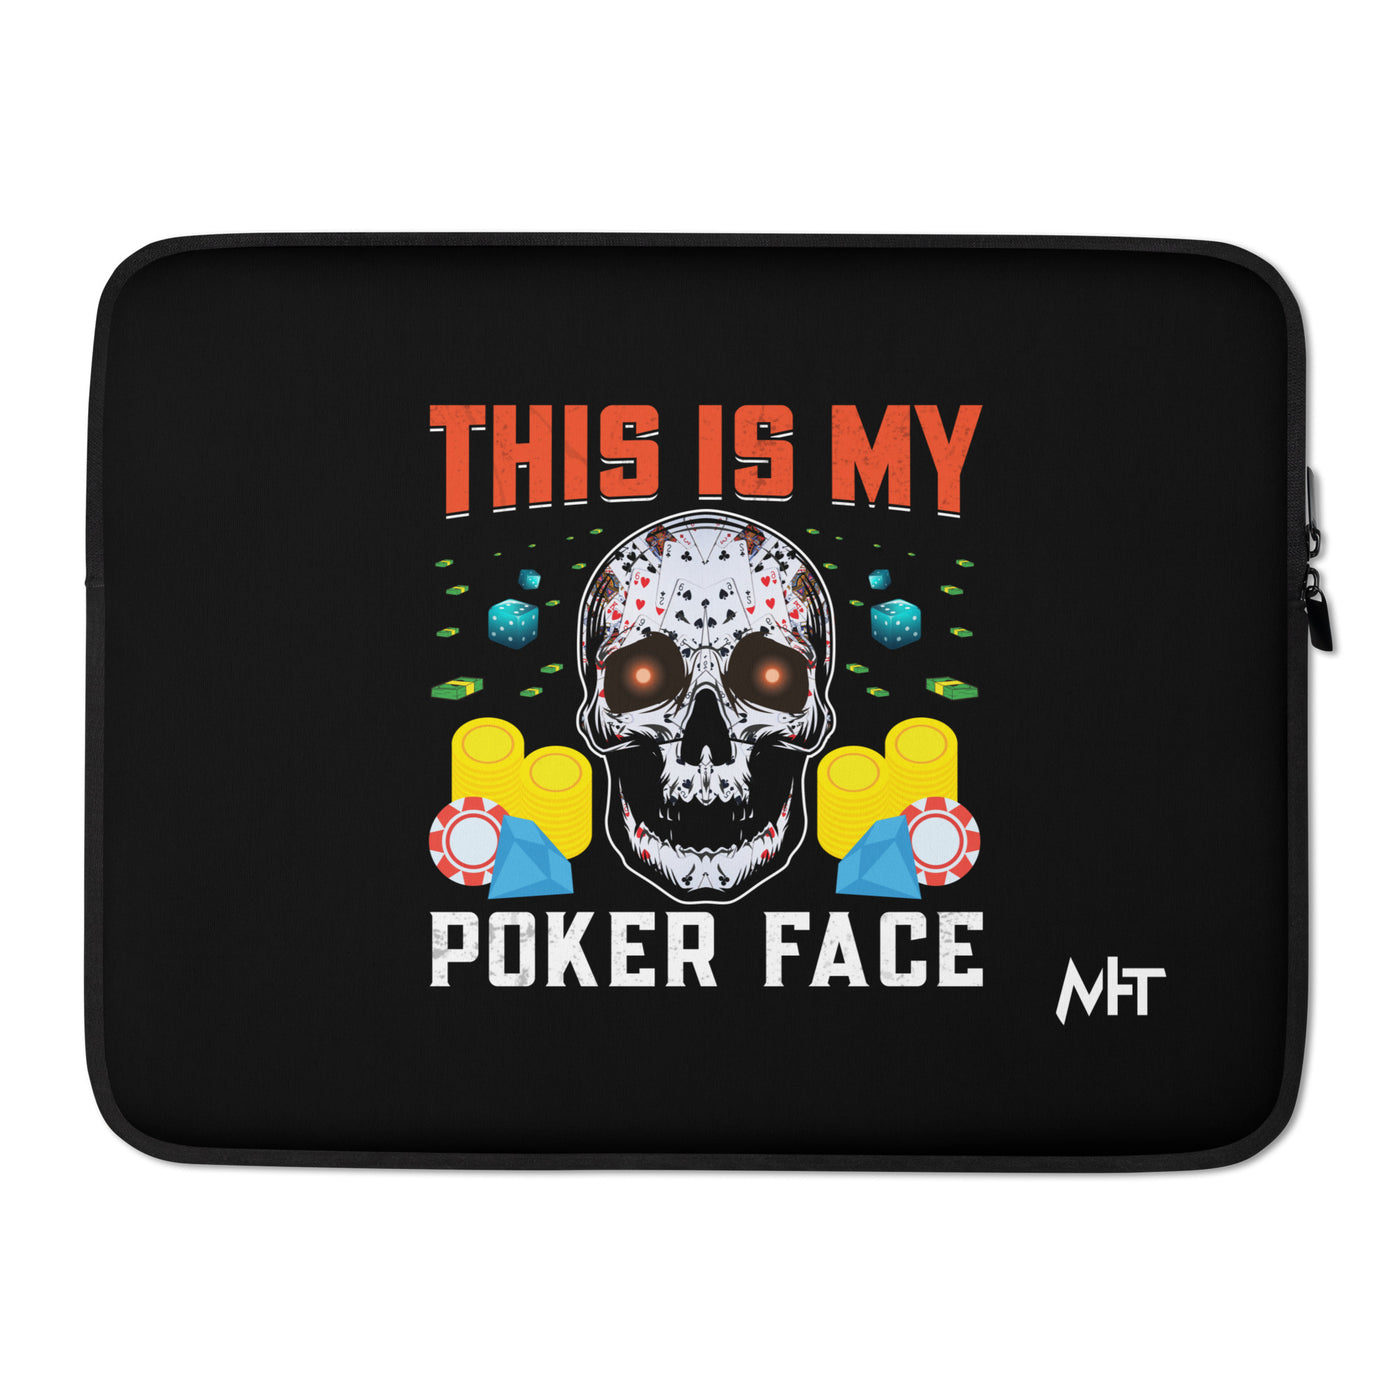 This is My Poker Face - Laptop Sleeve